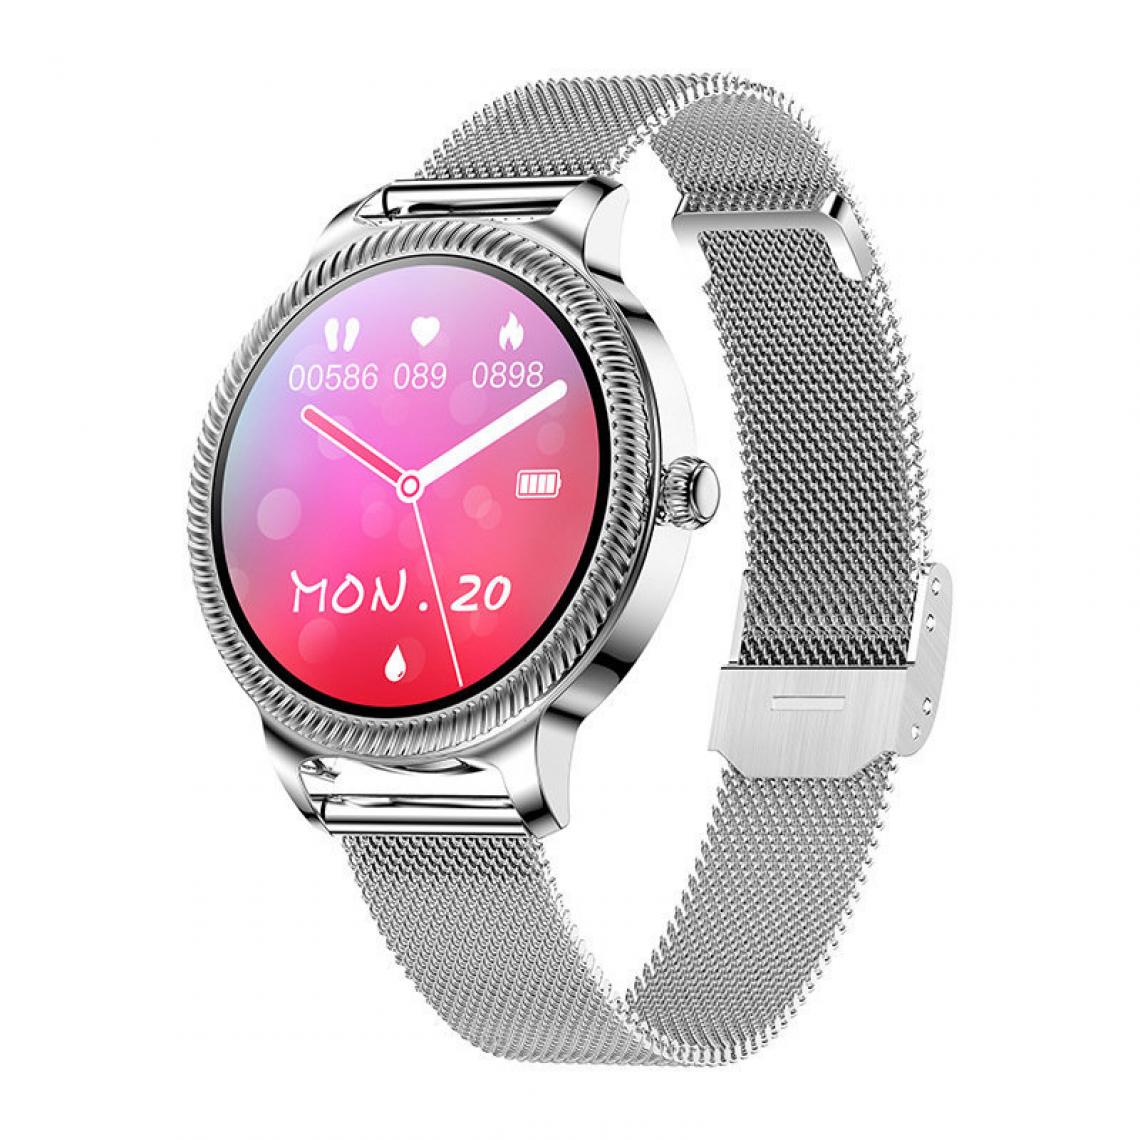 Chronotech Montres - Women Connected Watch, Smart Connected Watch with Personalized Dial, IP68 Waterproof Smartwatch, Heart Rate Monitor,(silver) - Montre connectée